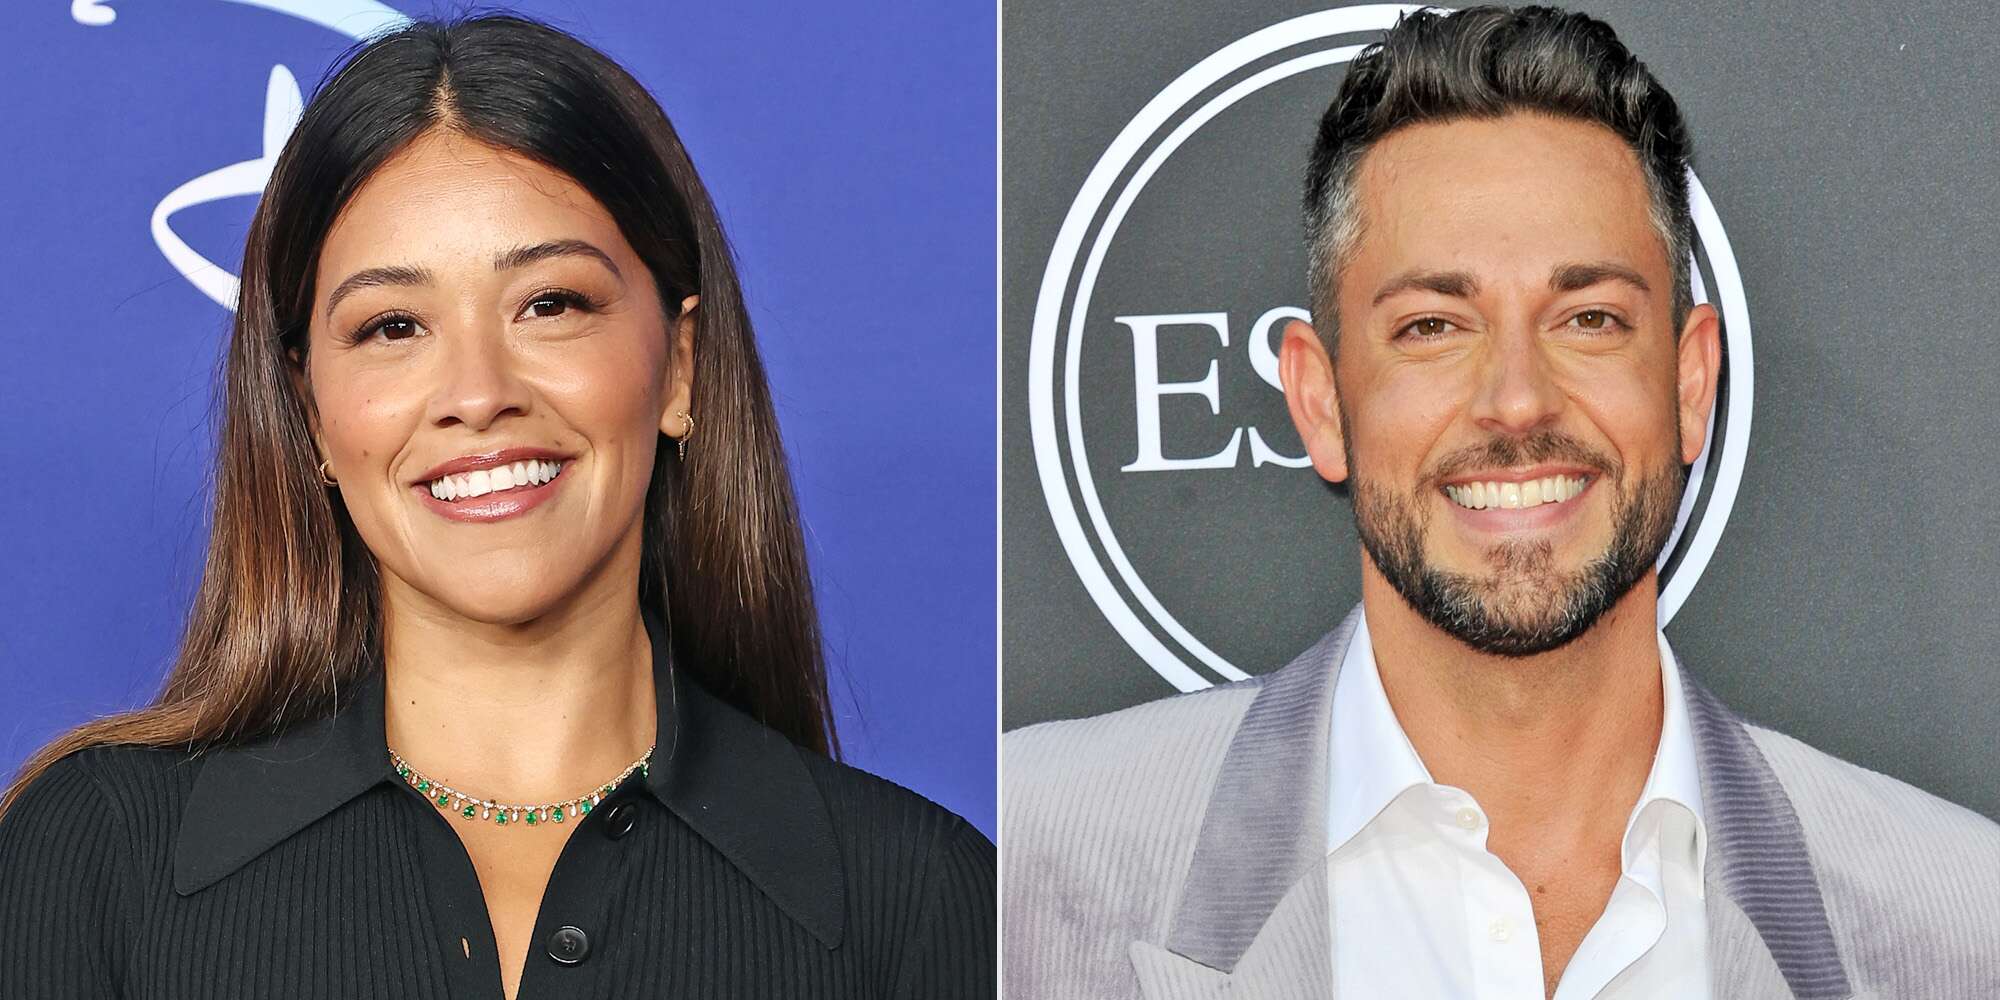 Gina Rodriguez and Zachary Levi are suiting up for the Spy Kids reboot film